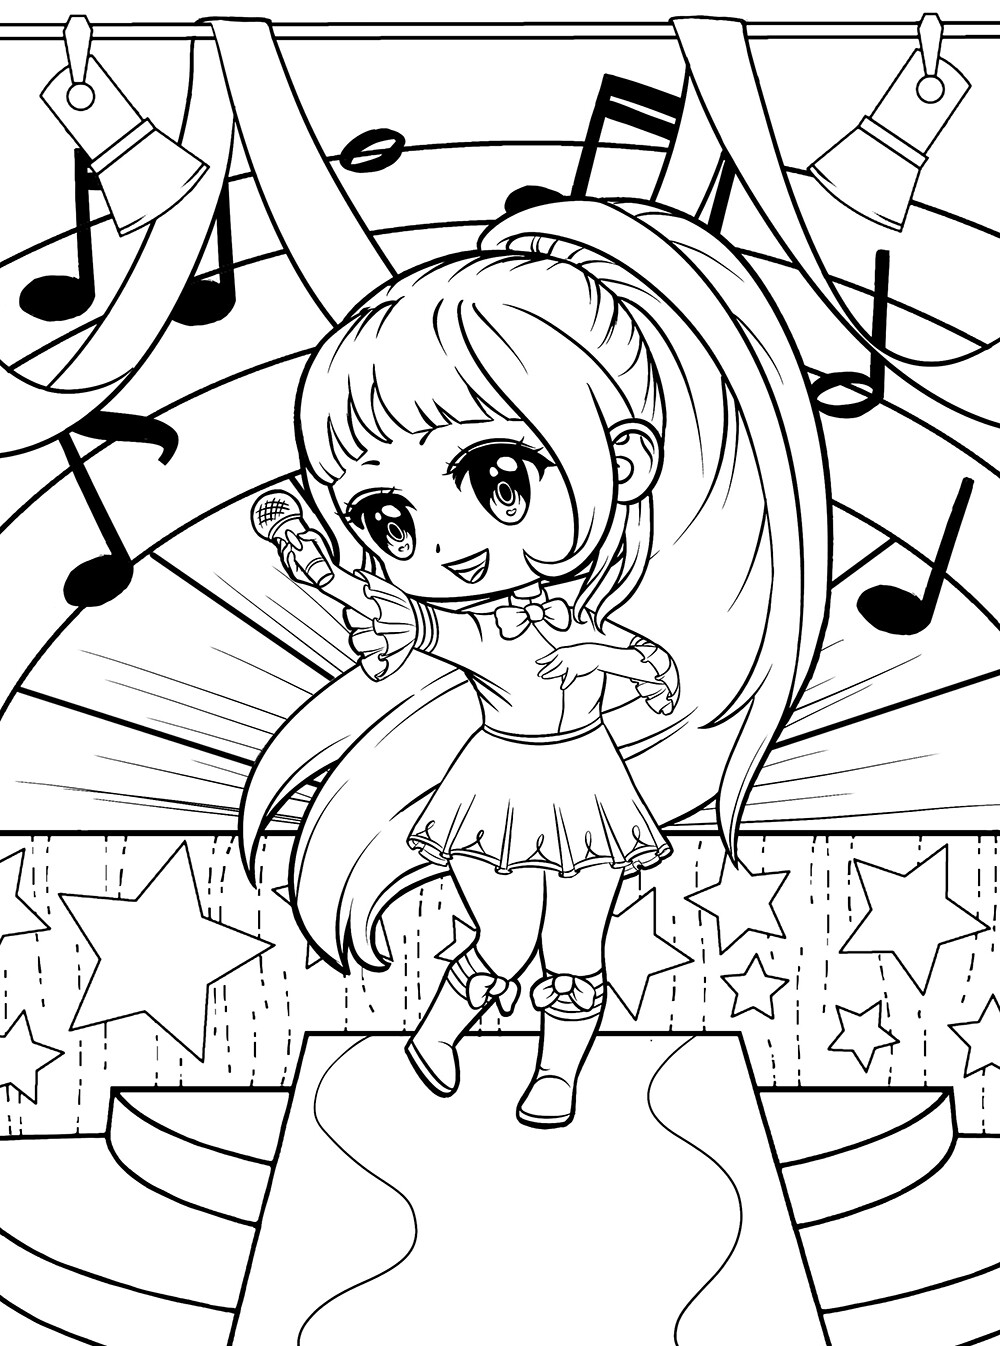 Chibi Lucy Heartfilia 2 Coloring Page  Free Printable Coloring Pages for  Kids